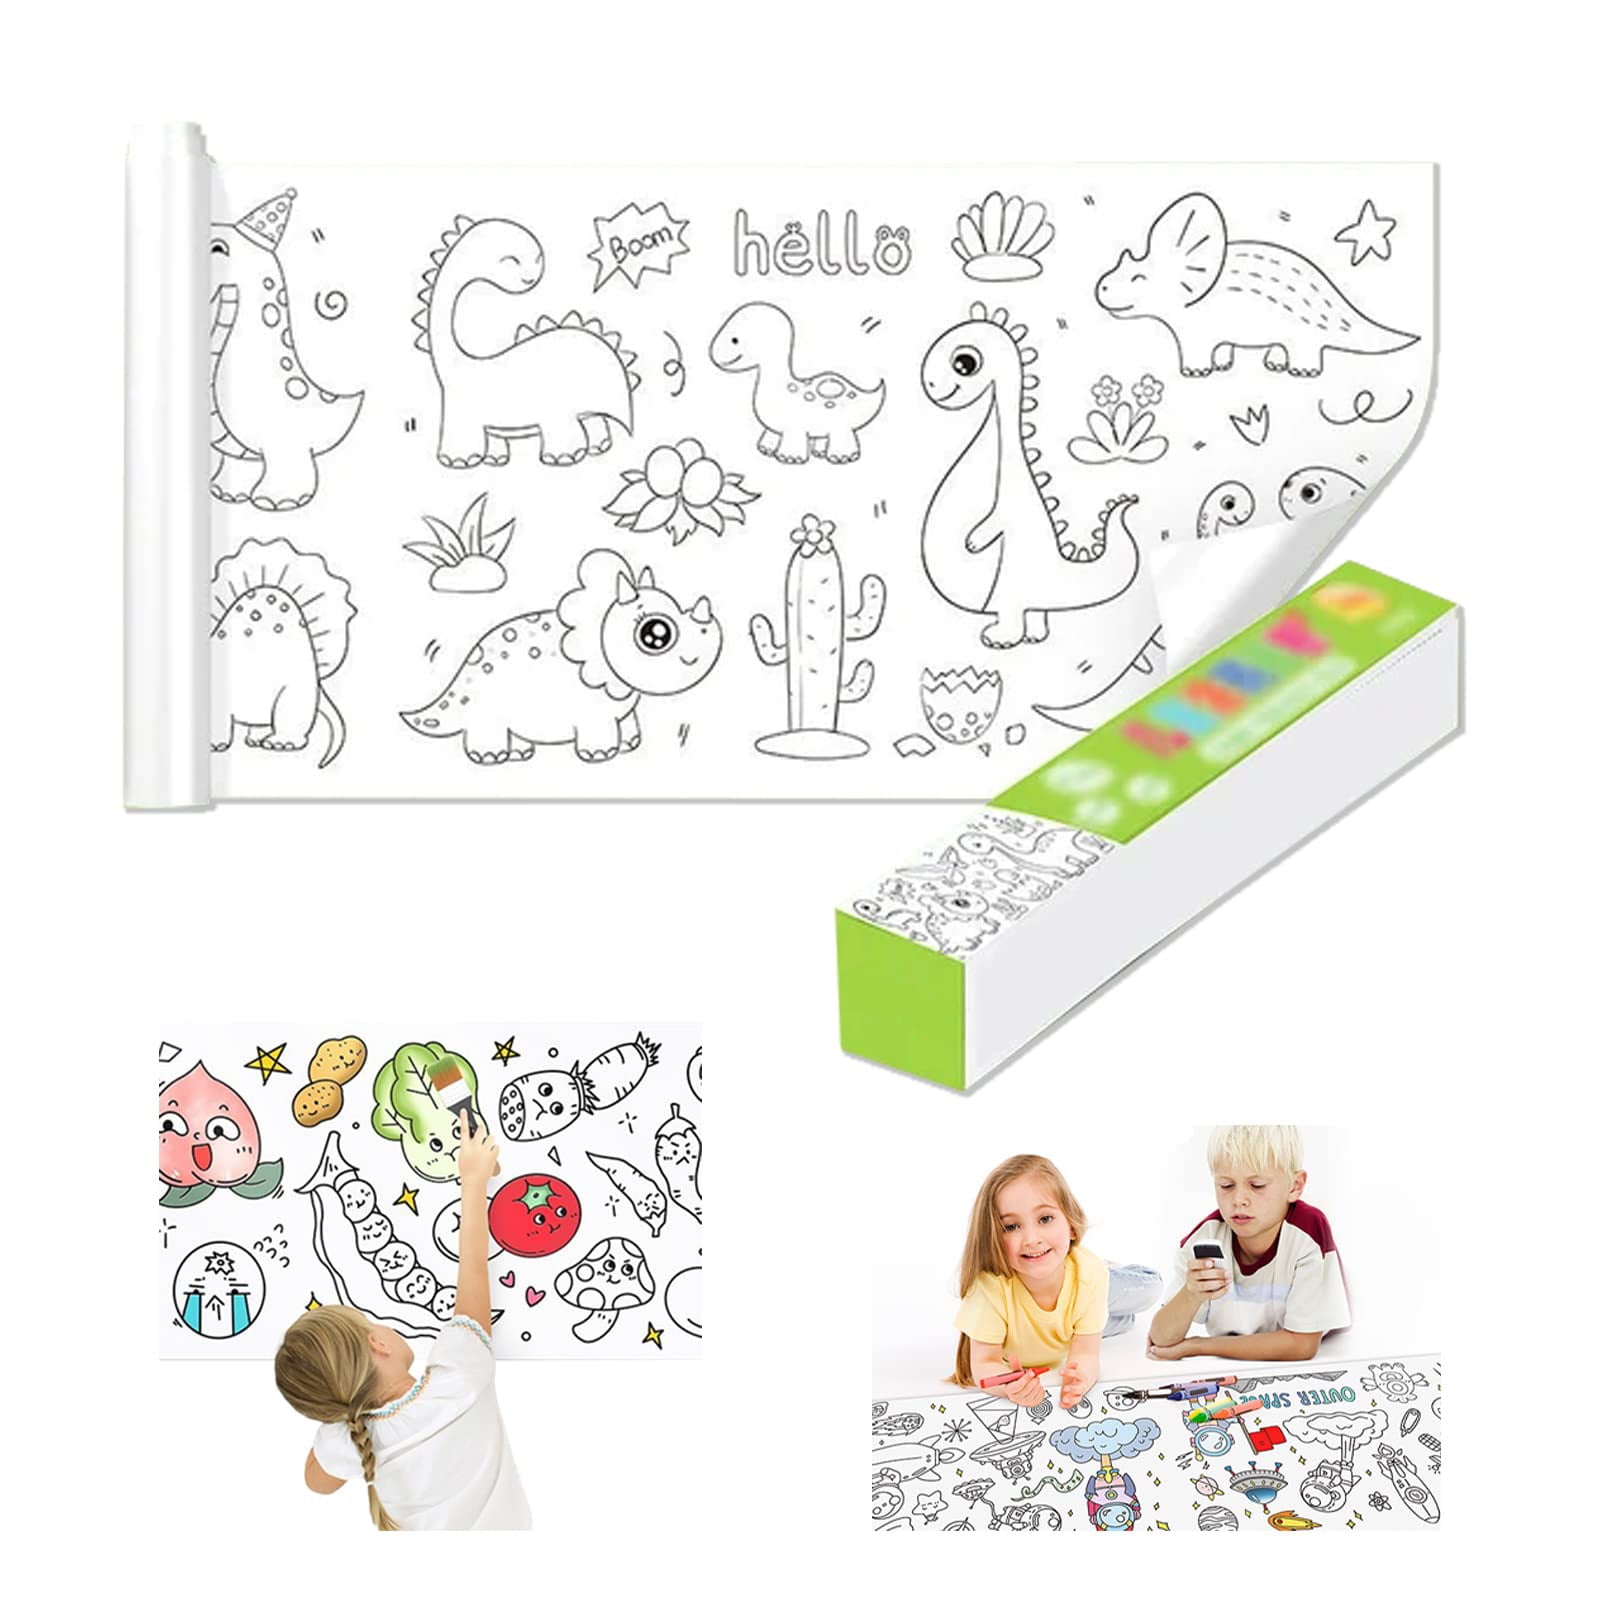 CHILDREN'S DRAWING ROLL of Paper For Kids Coloring Roll Paper For Kids>  S8U4 $12.14 - PicClick AU